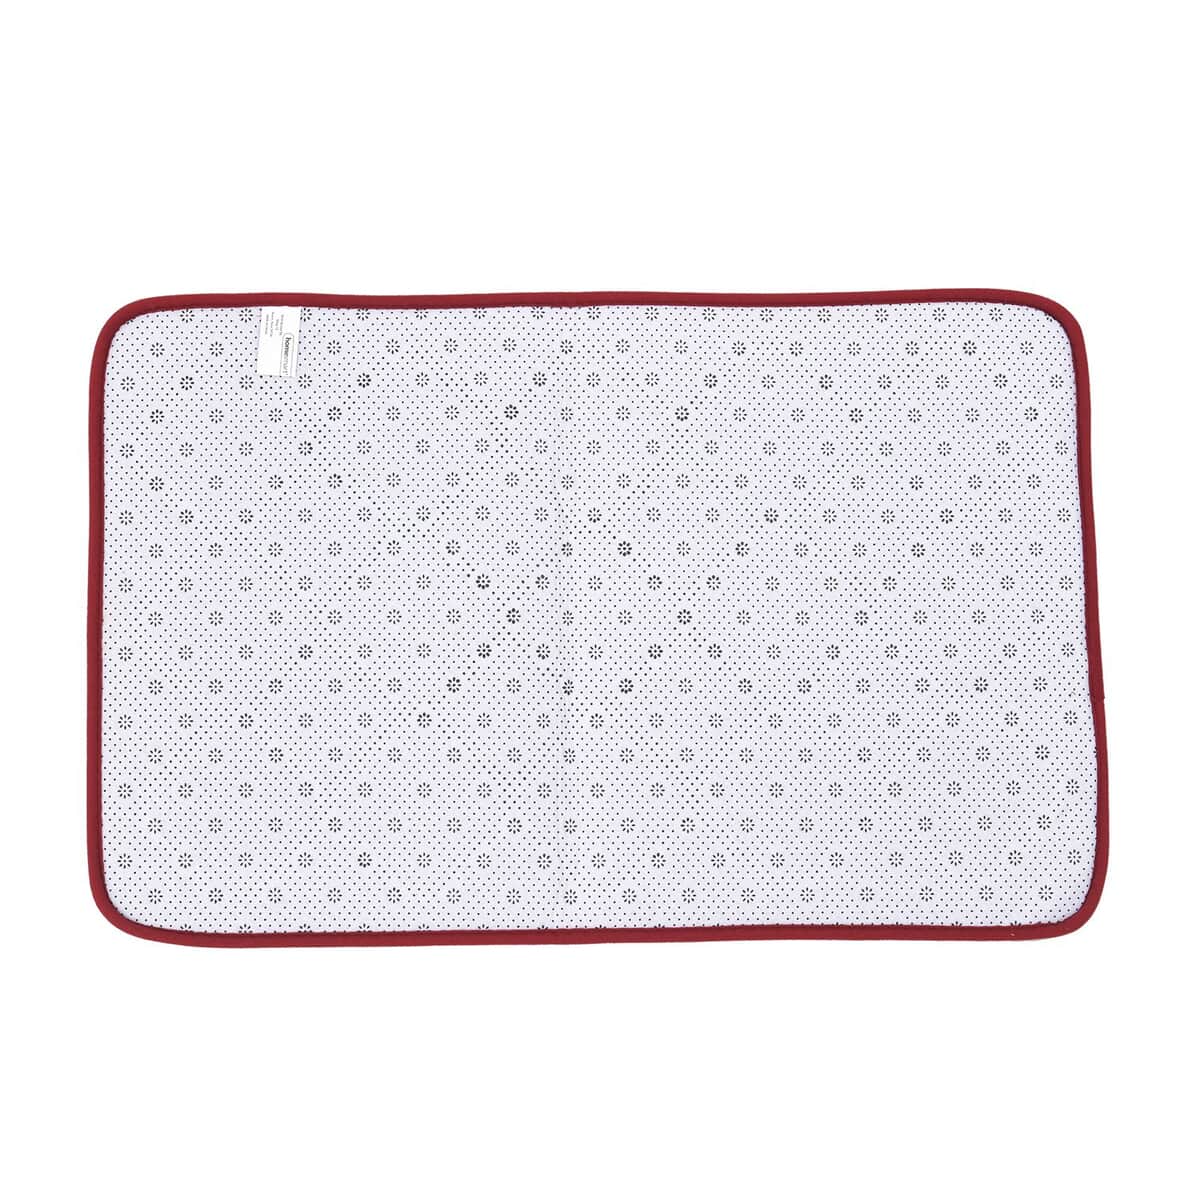 HOMESMART Red Embossed Flannel Non-Woven Anti Slip Dot Backing Bath Mat (19"x31") and Contour Toilet Mat (19"x15") image number 5